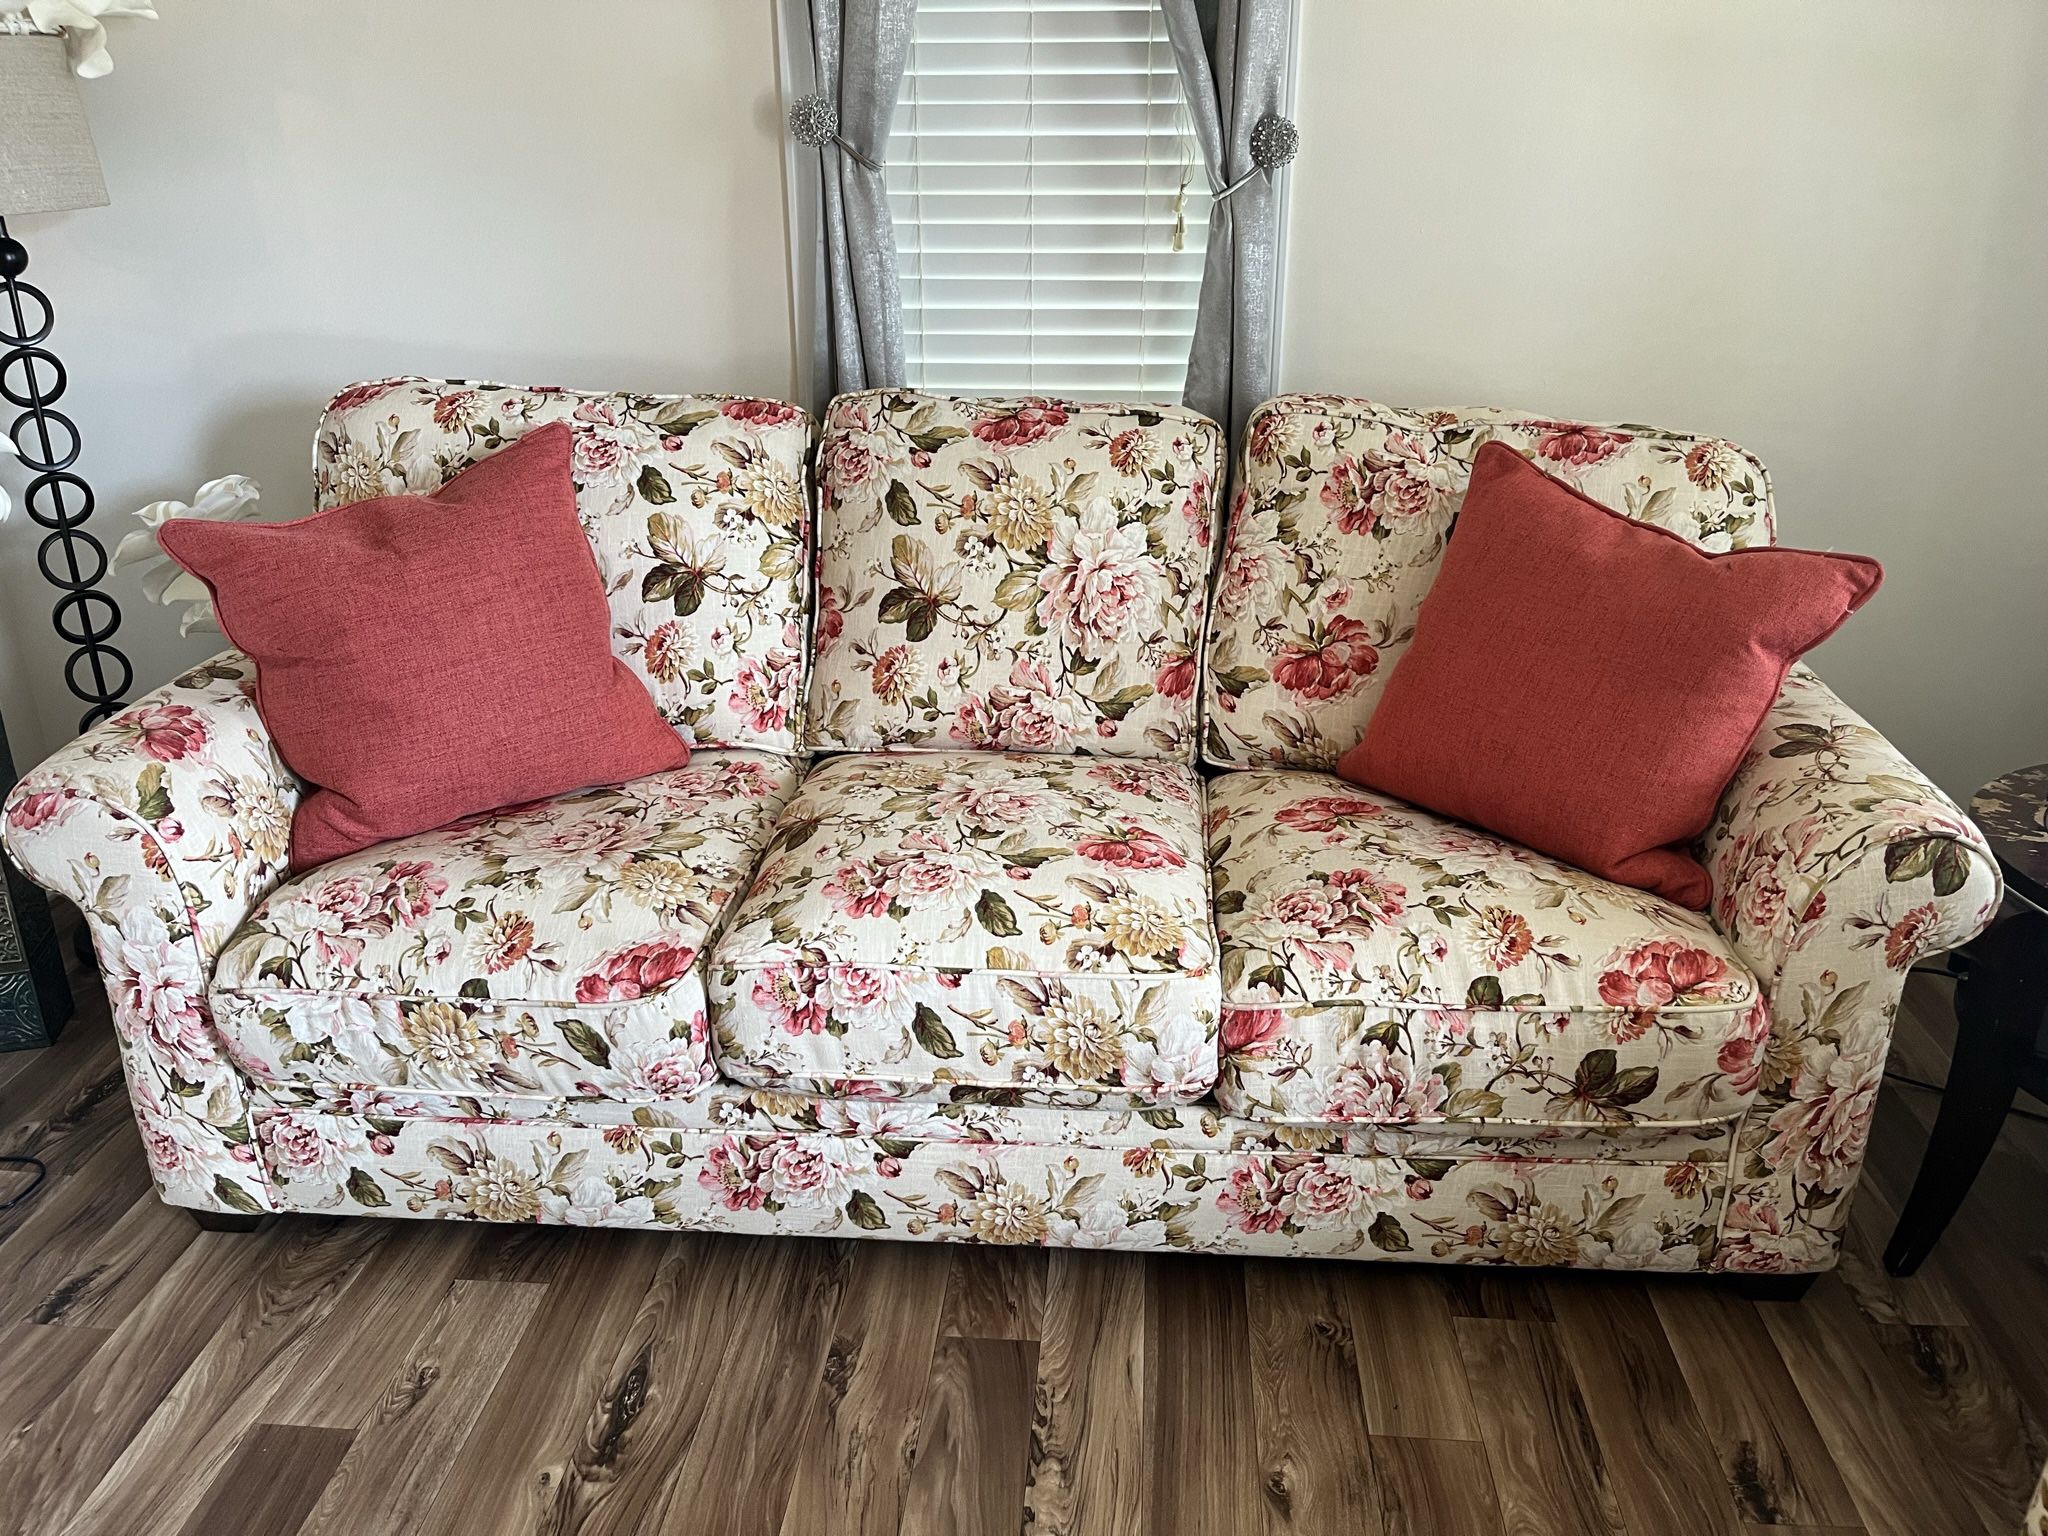 Couch with Pull-Out Bed (bed never used) & Chair from Havertys Furniture